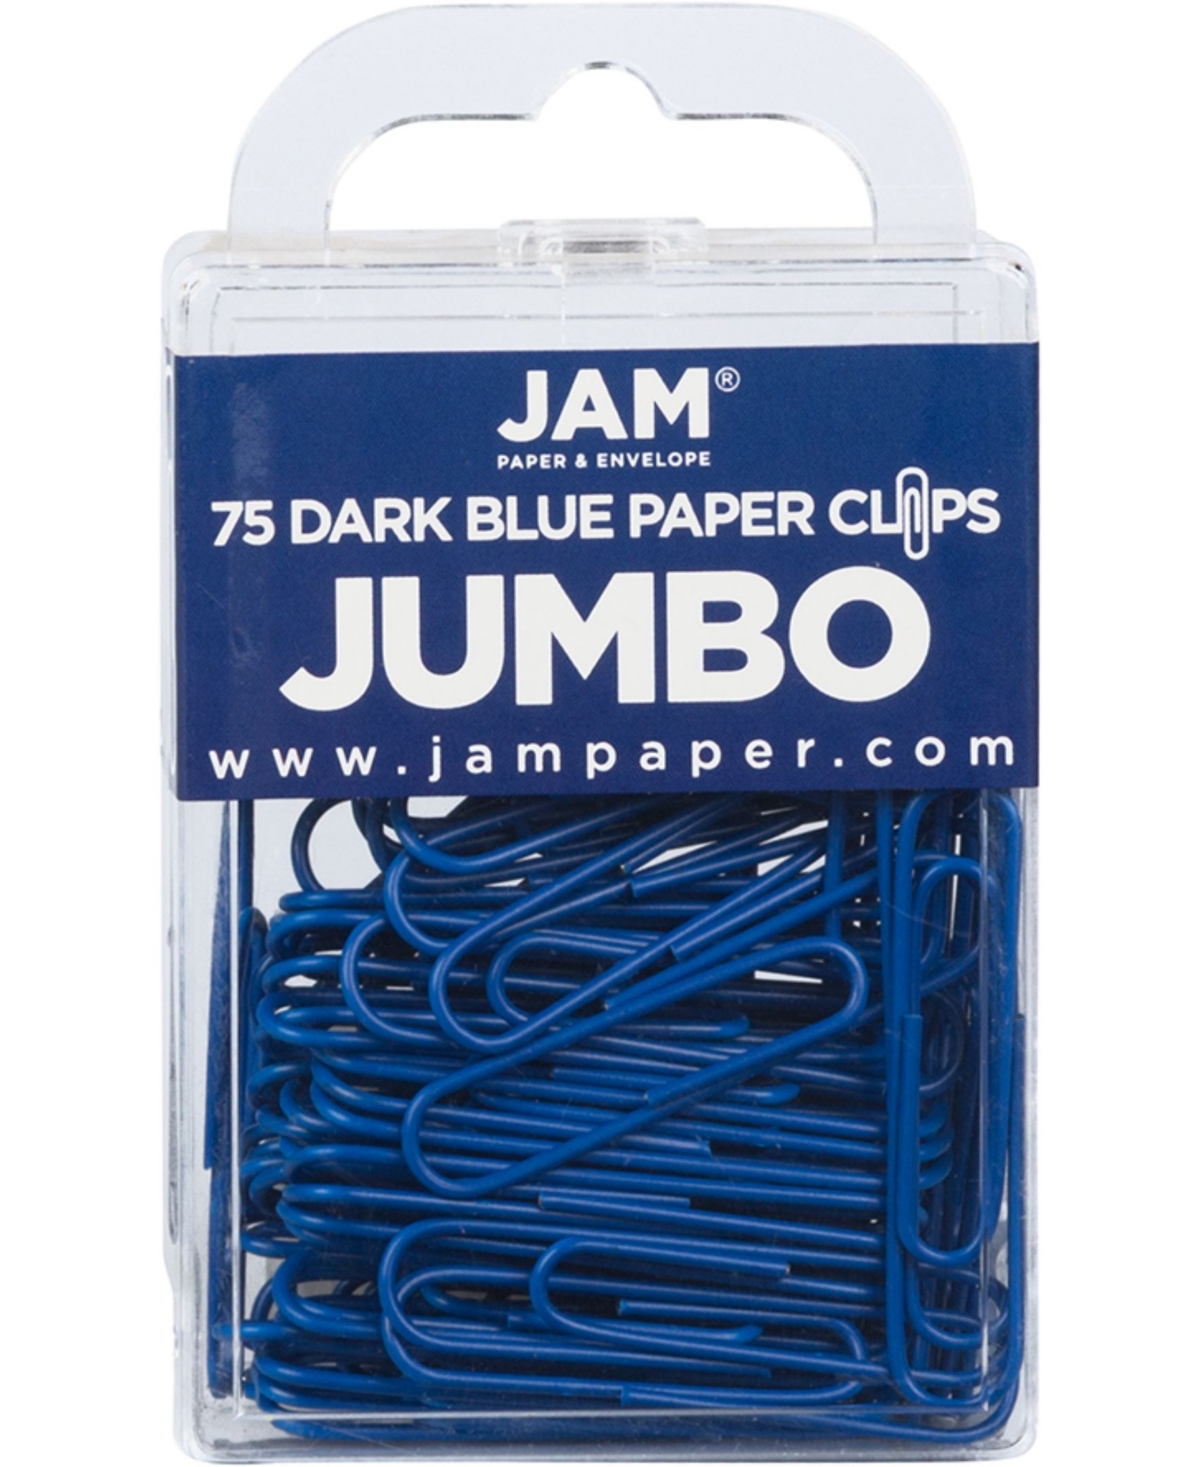 Colorful Jumbo Paper Clips - Large 2" - Paperclips - 75 Per Pack - Dark Blue